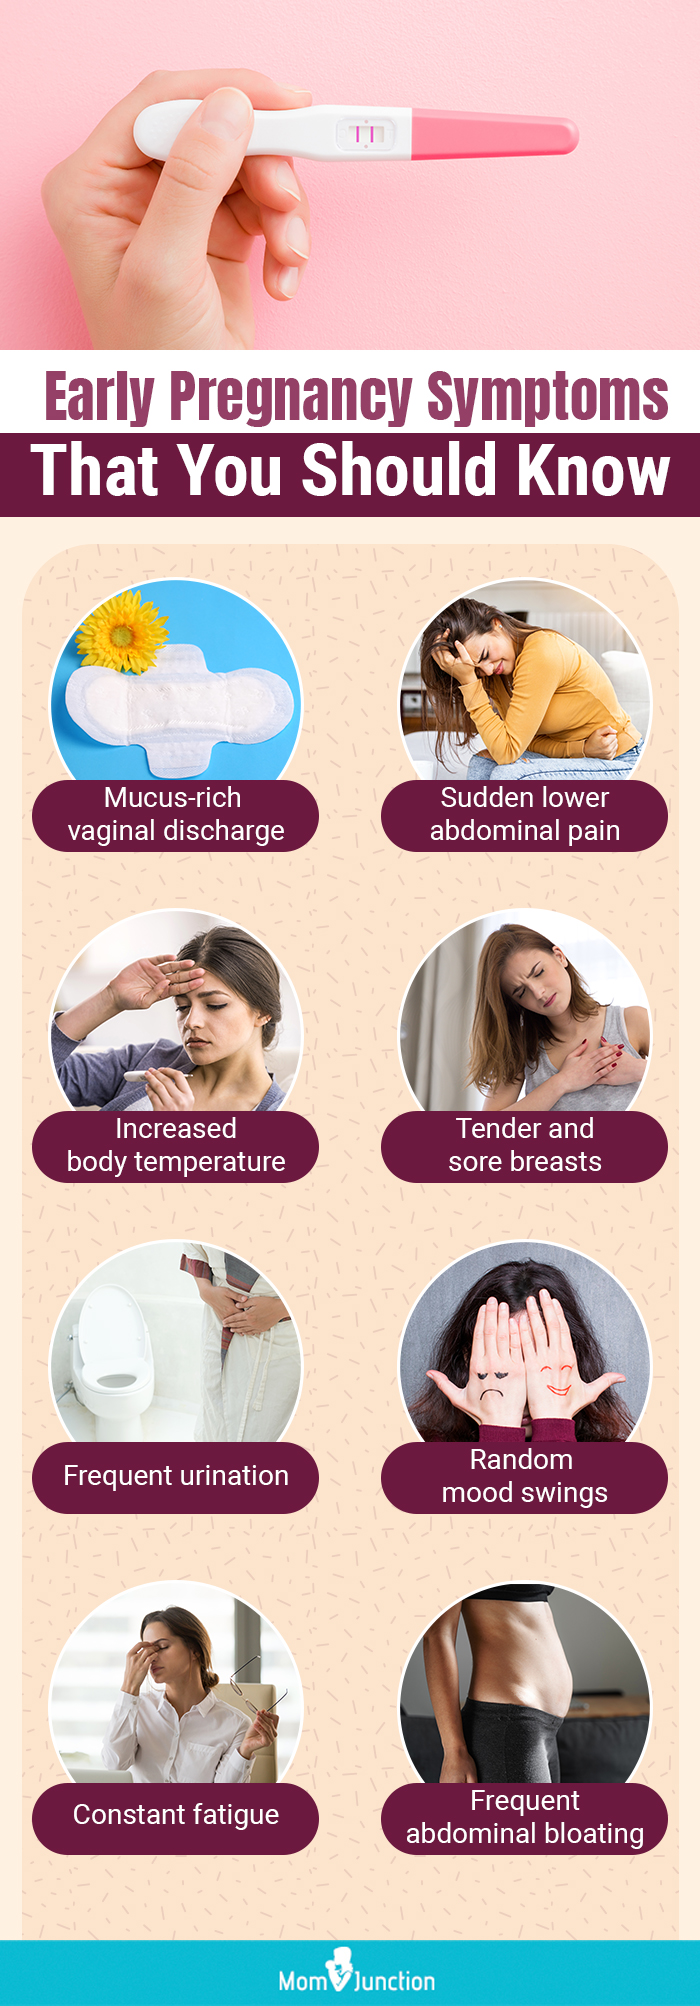 early pregnancy symptoms that you should know (infographic)